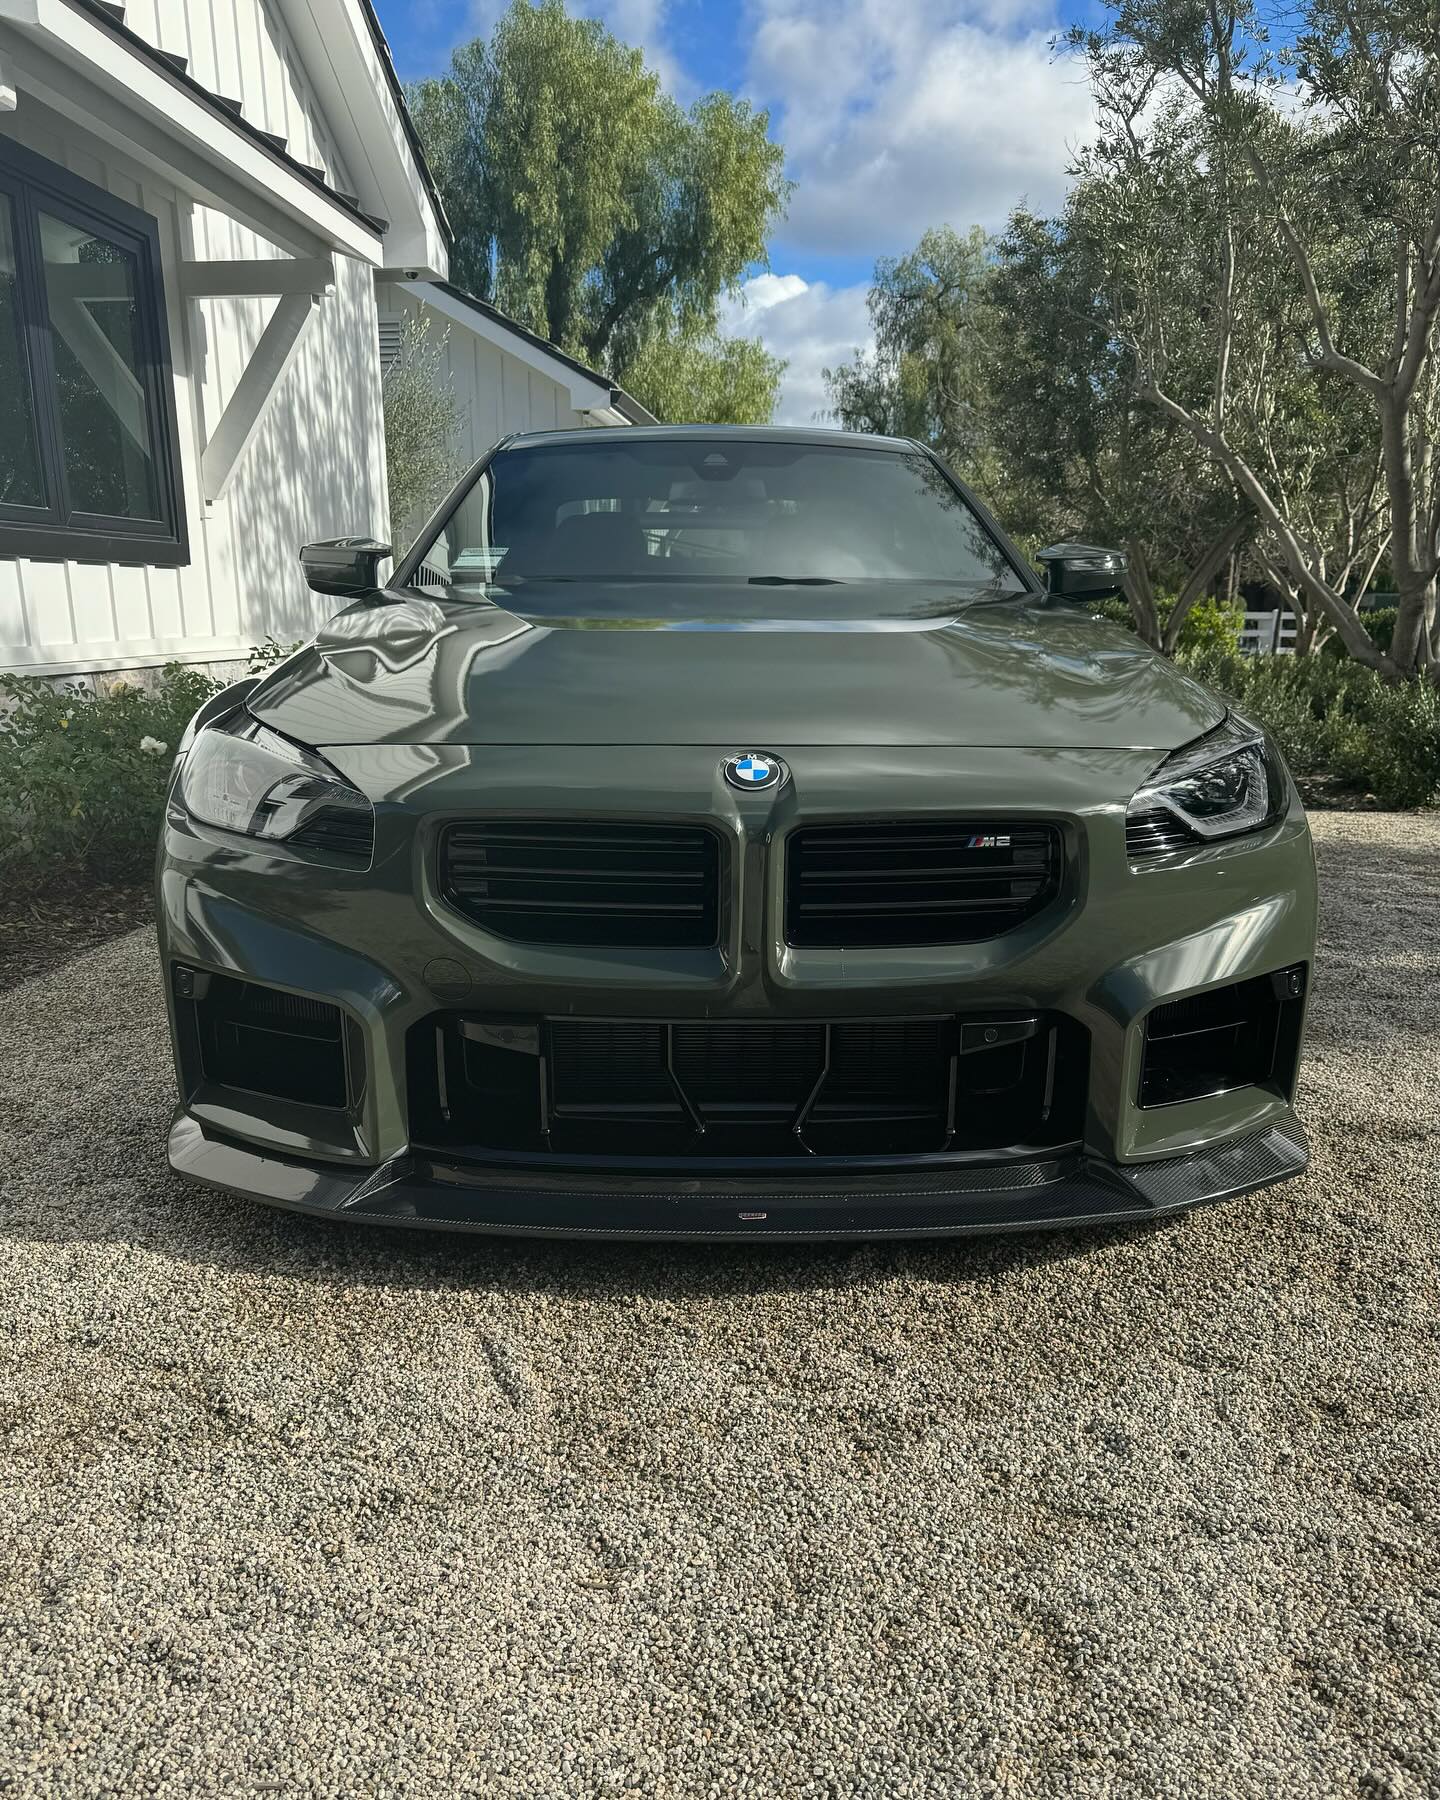 Scott recently customized a BMW M2 he purchased for himself